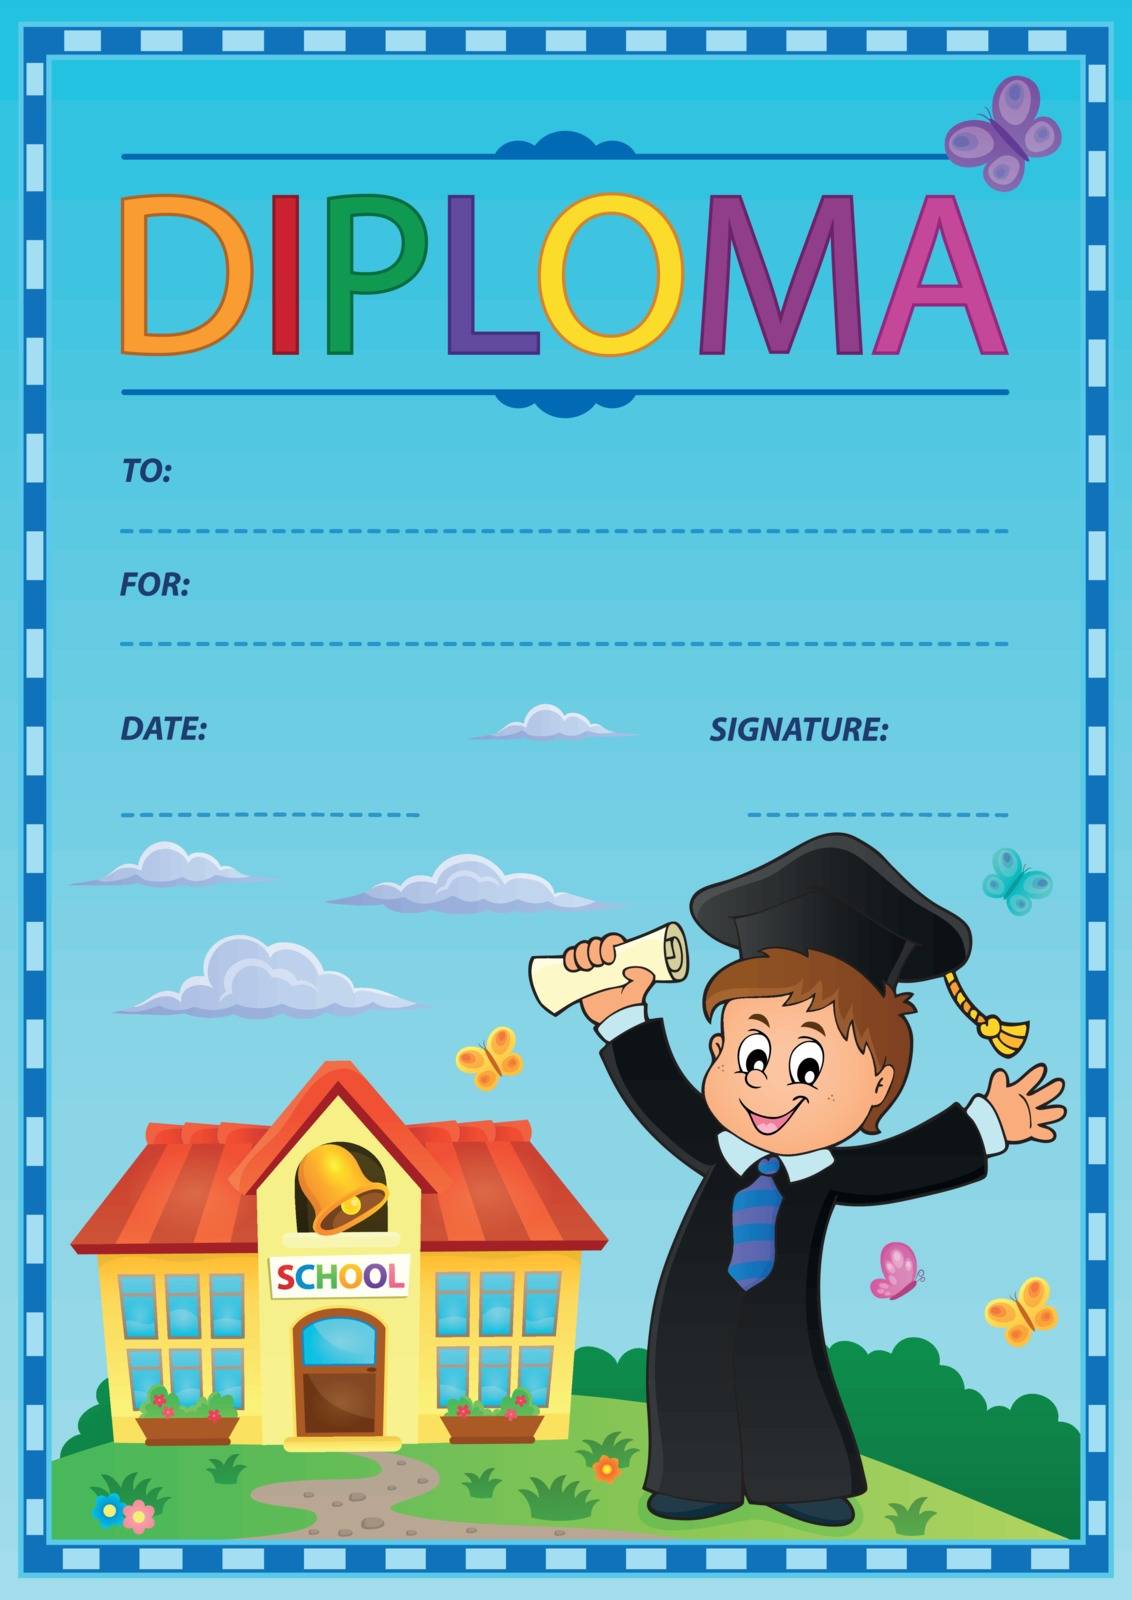 Diploma subject image 2 by clairev